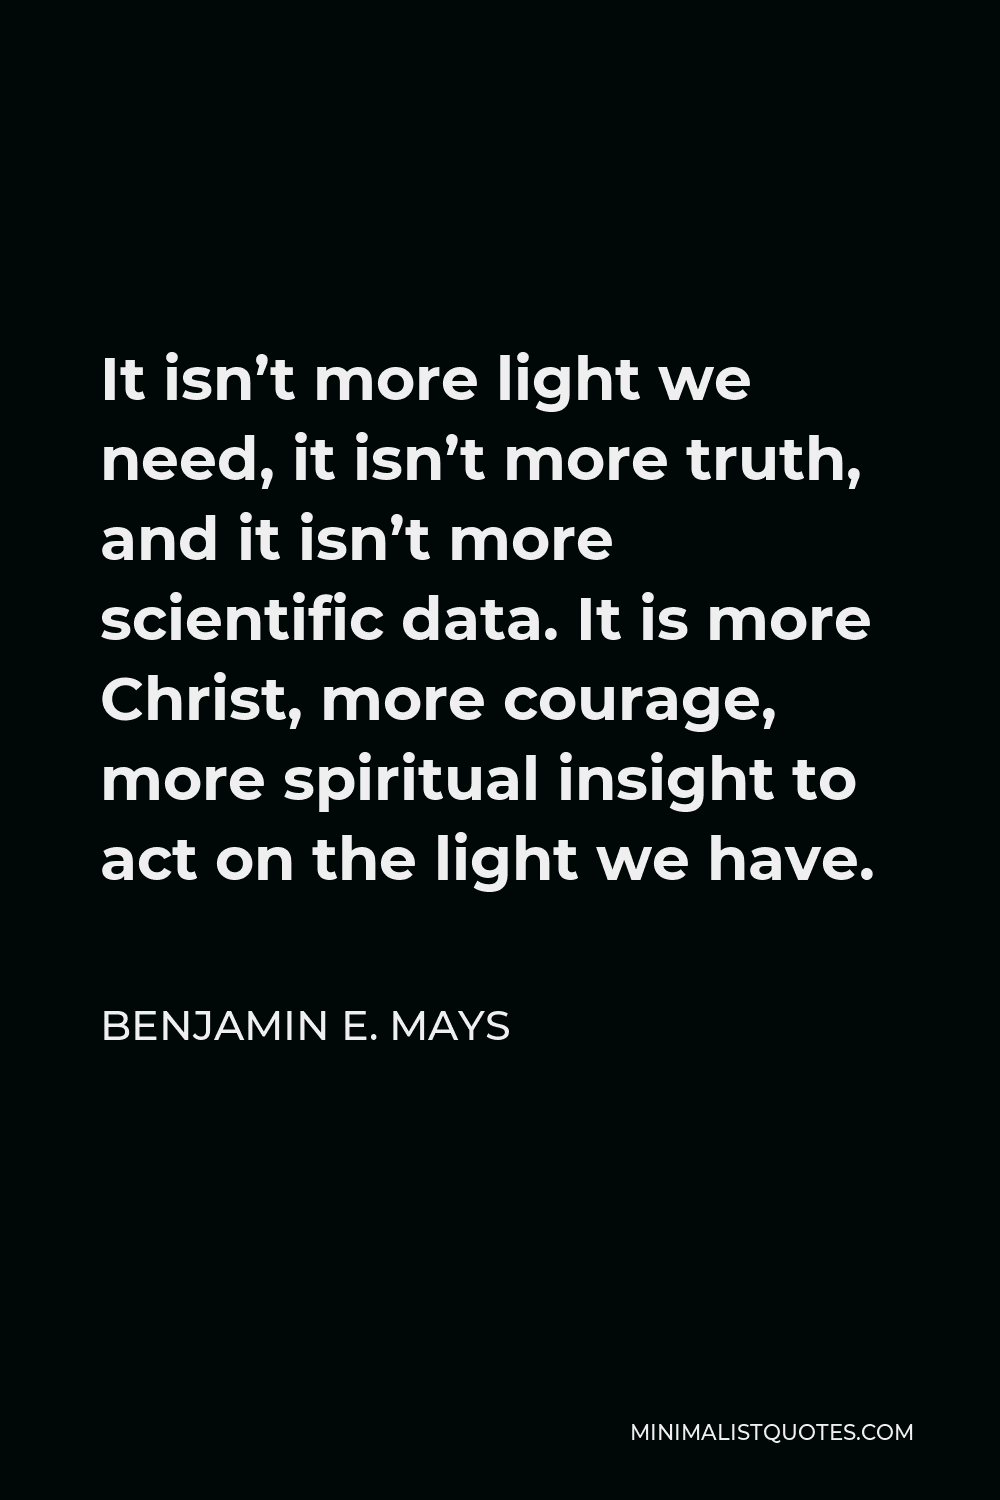 Benjamin E. Mays Quote - It isn’t more light we need, it isn’t more truth, and it isn’t more scientific data. It is more Christ, more courage, more spiritual insight to act on the light we have.